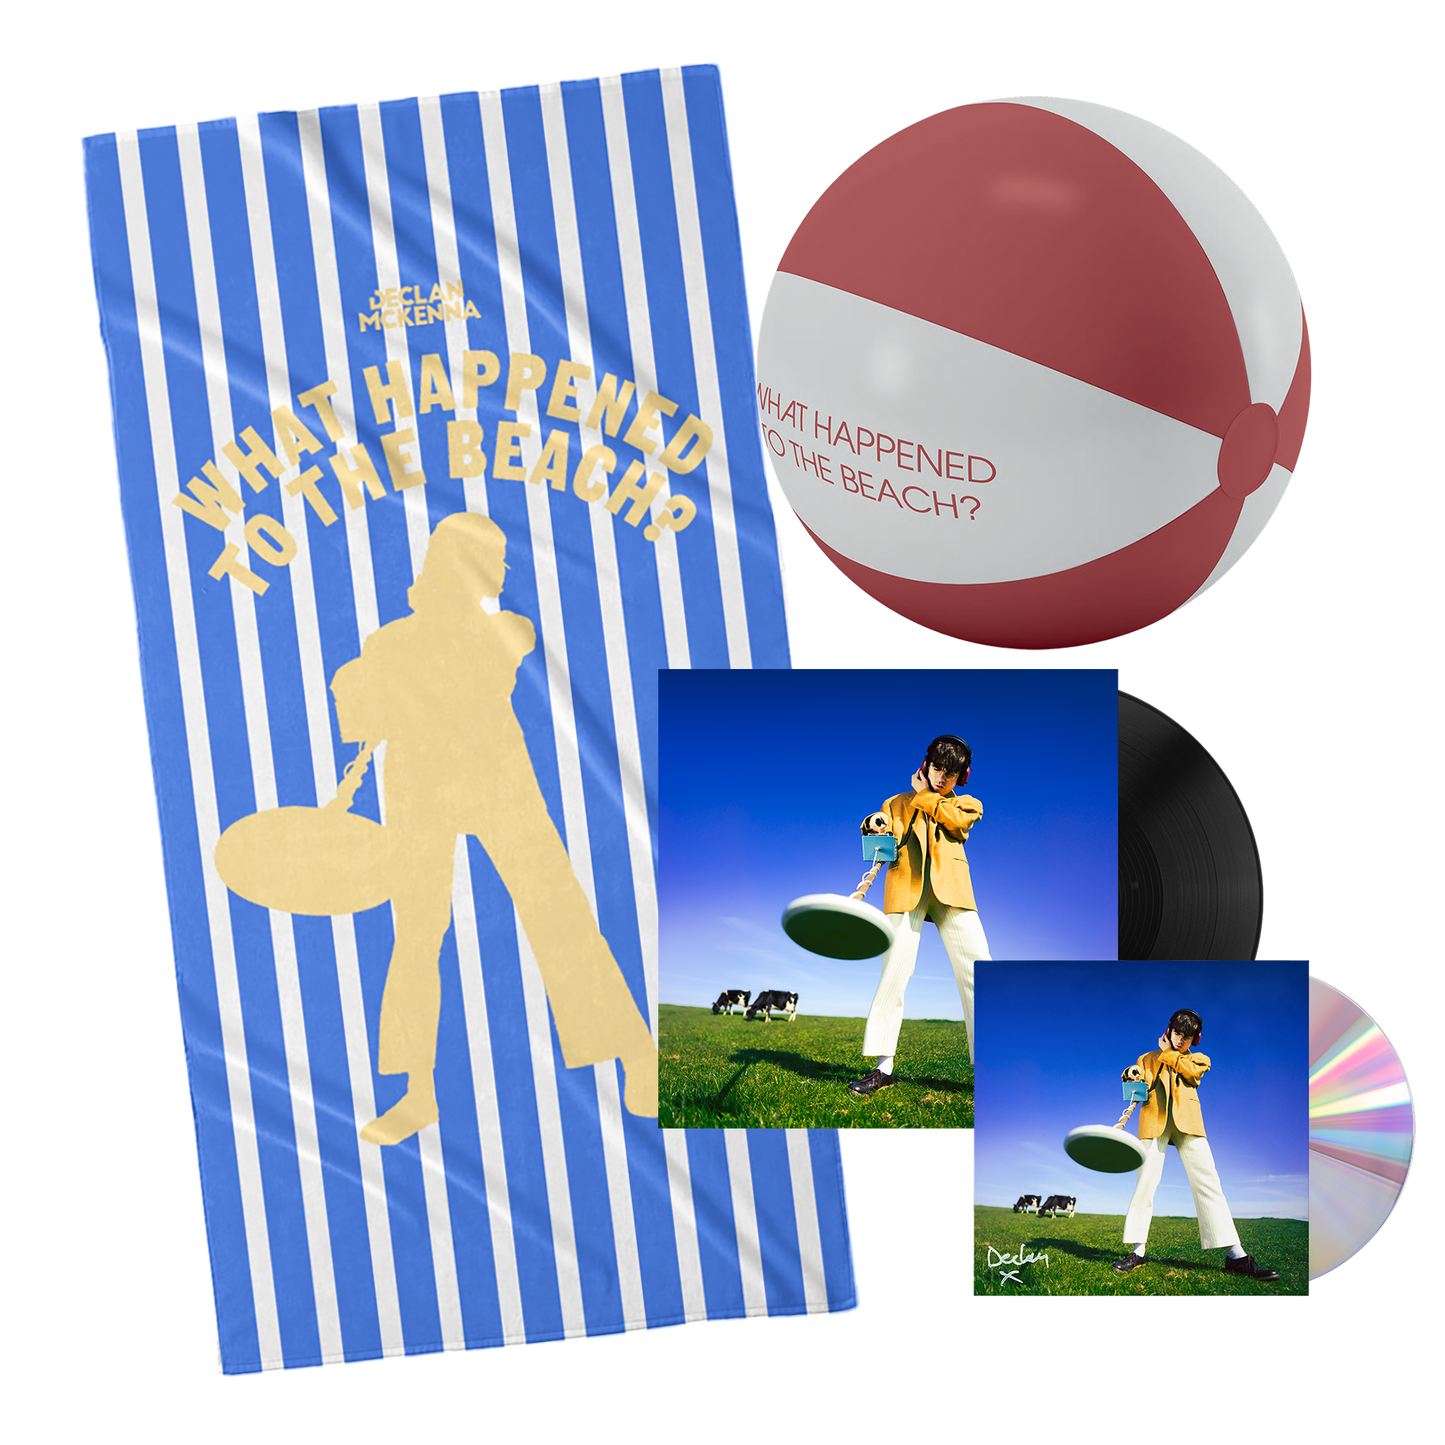 What Happened To The Beach? Beach Bundle [PREORDER]